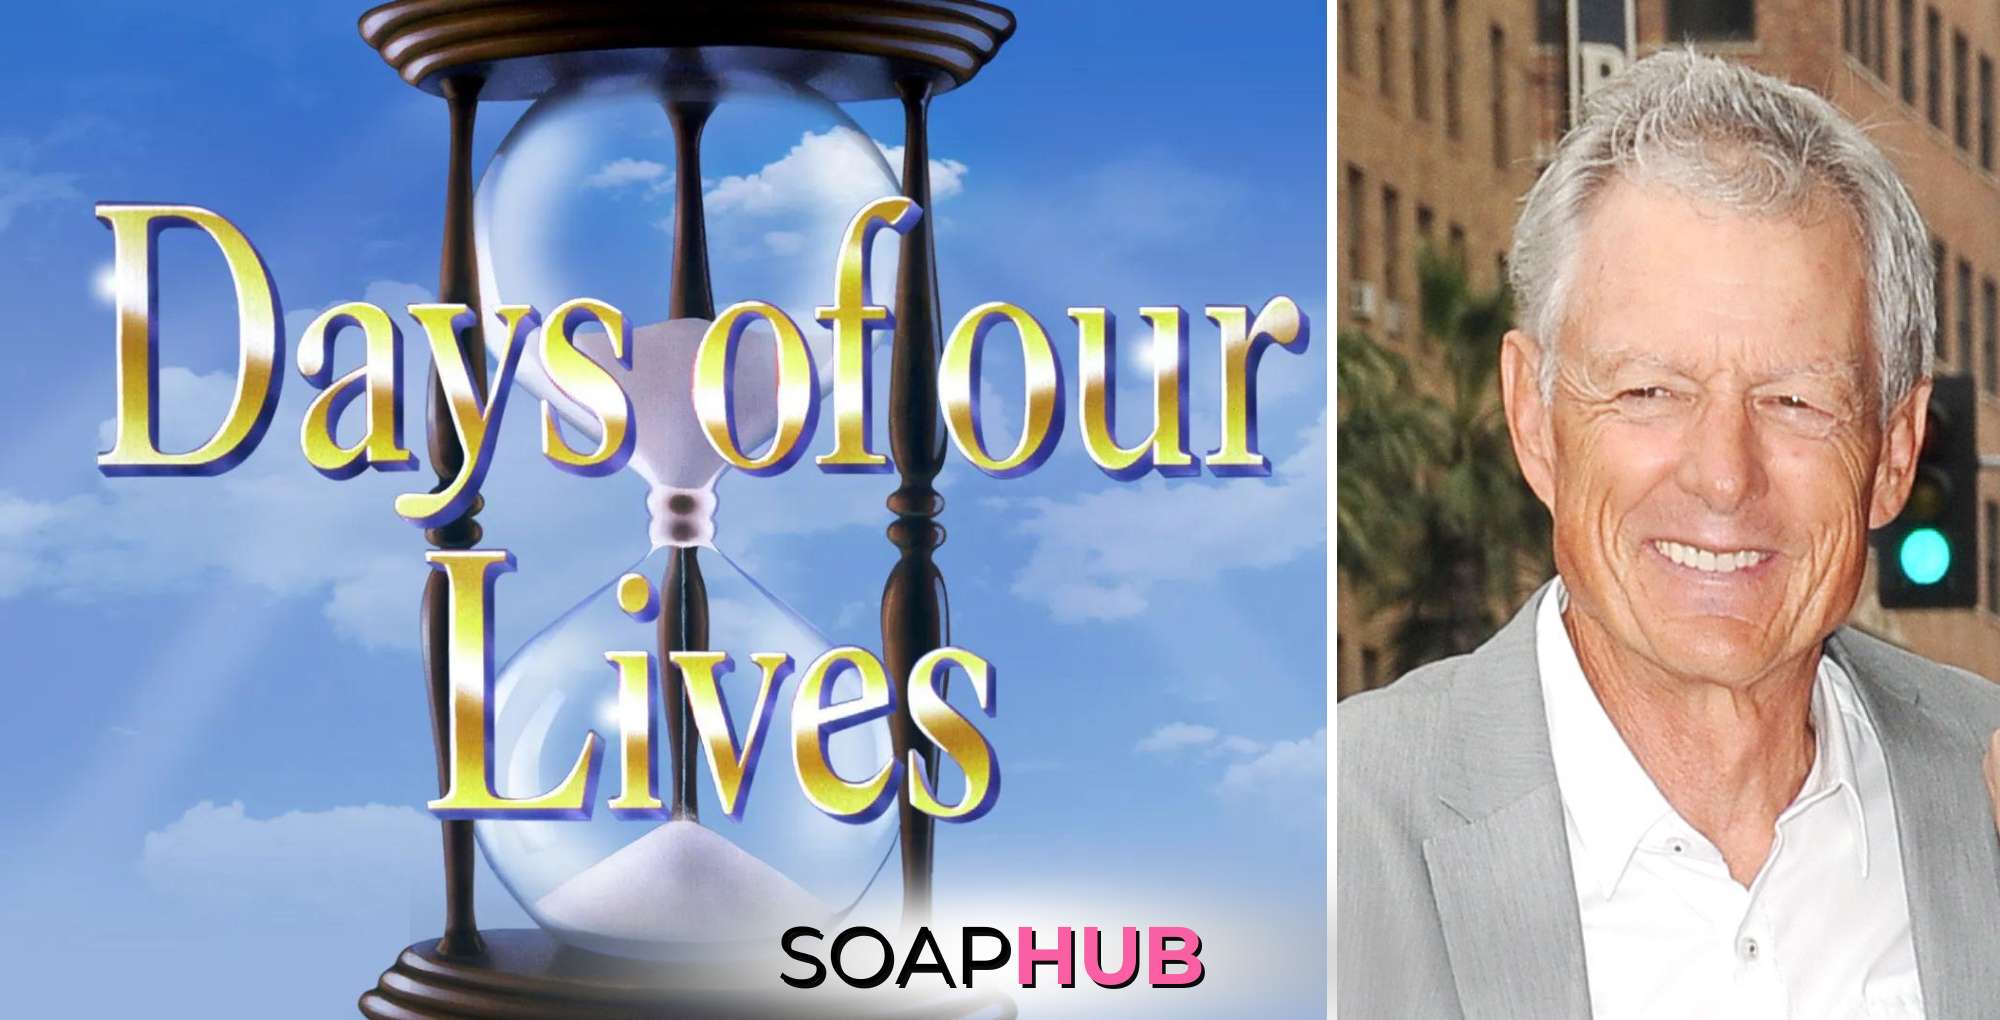 Days of our Lives Wayne Northrop with the Soap Hub logo across the bottom.